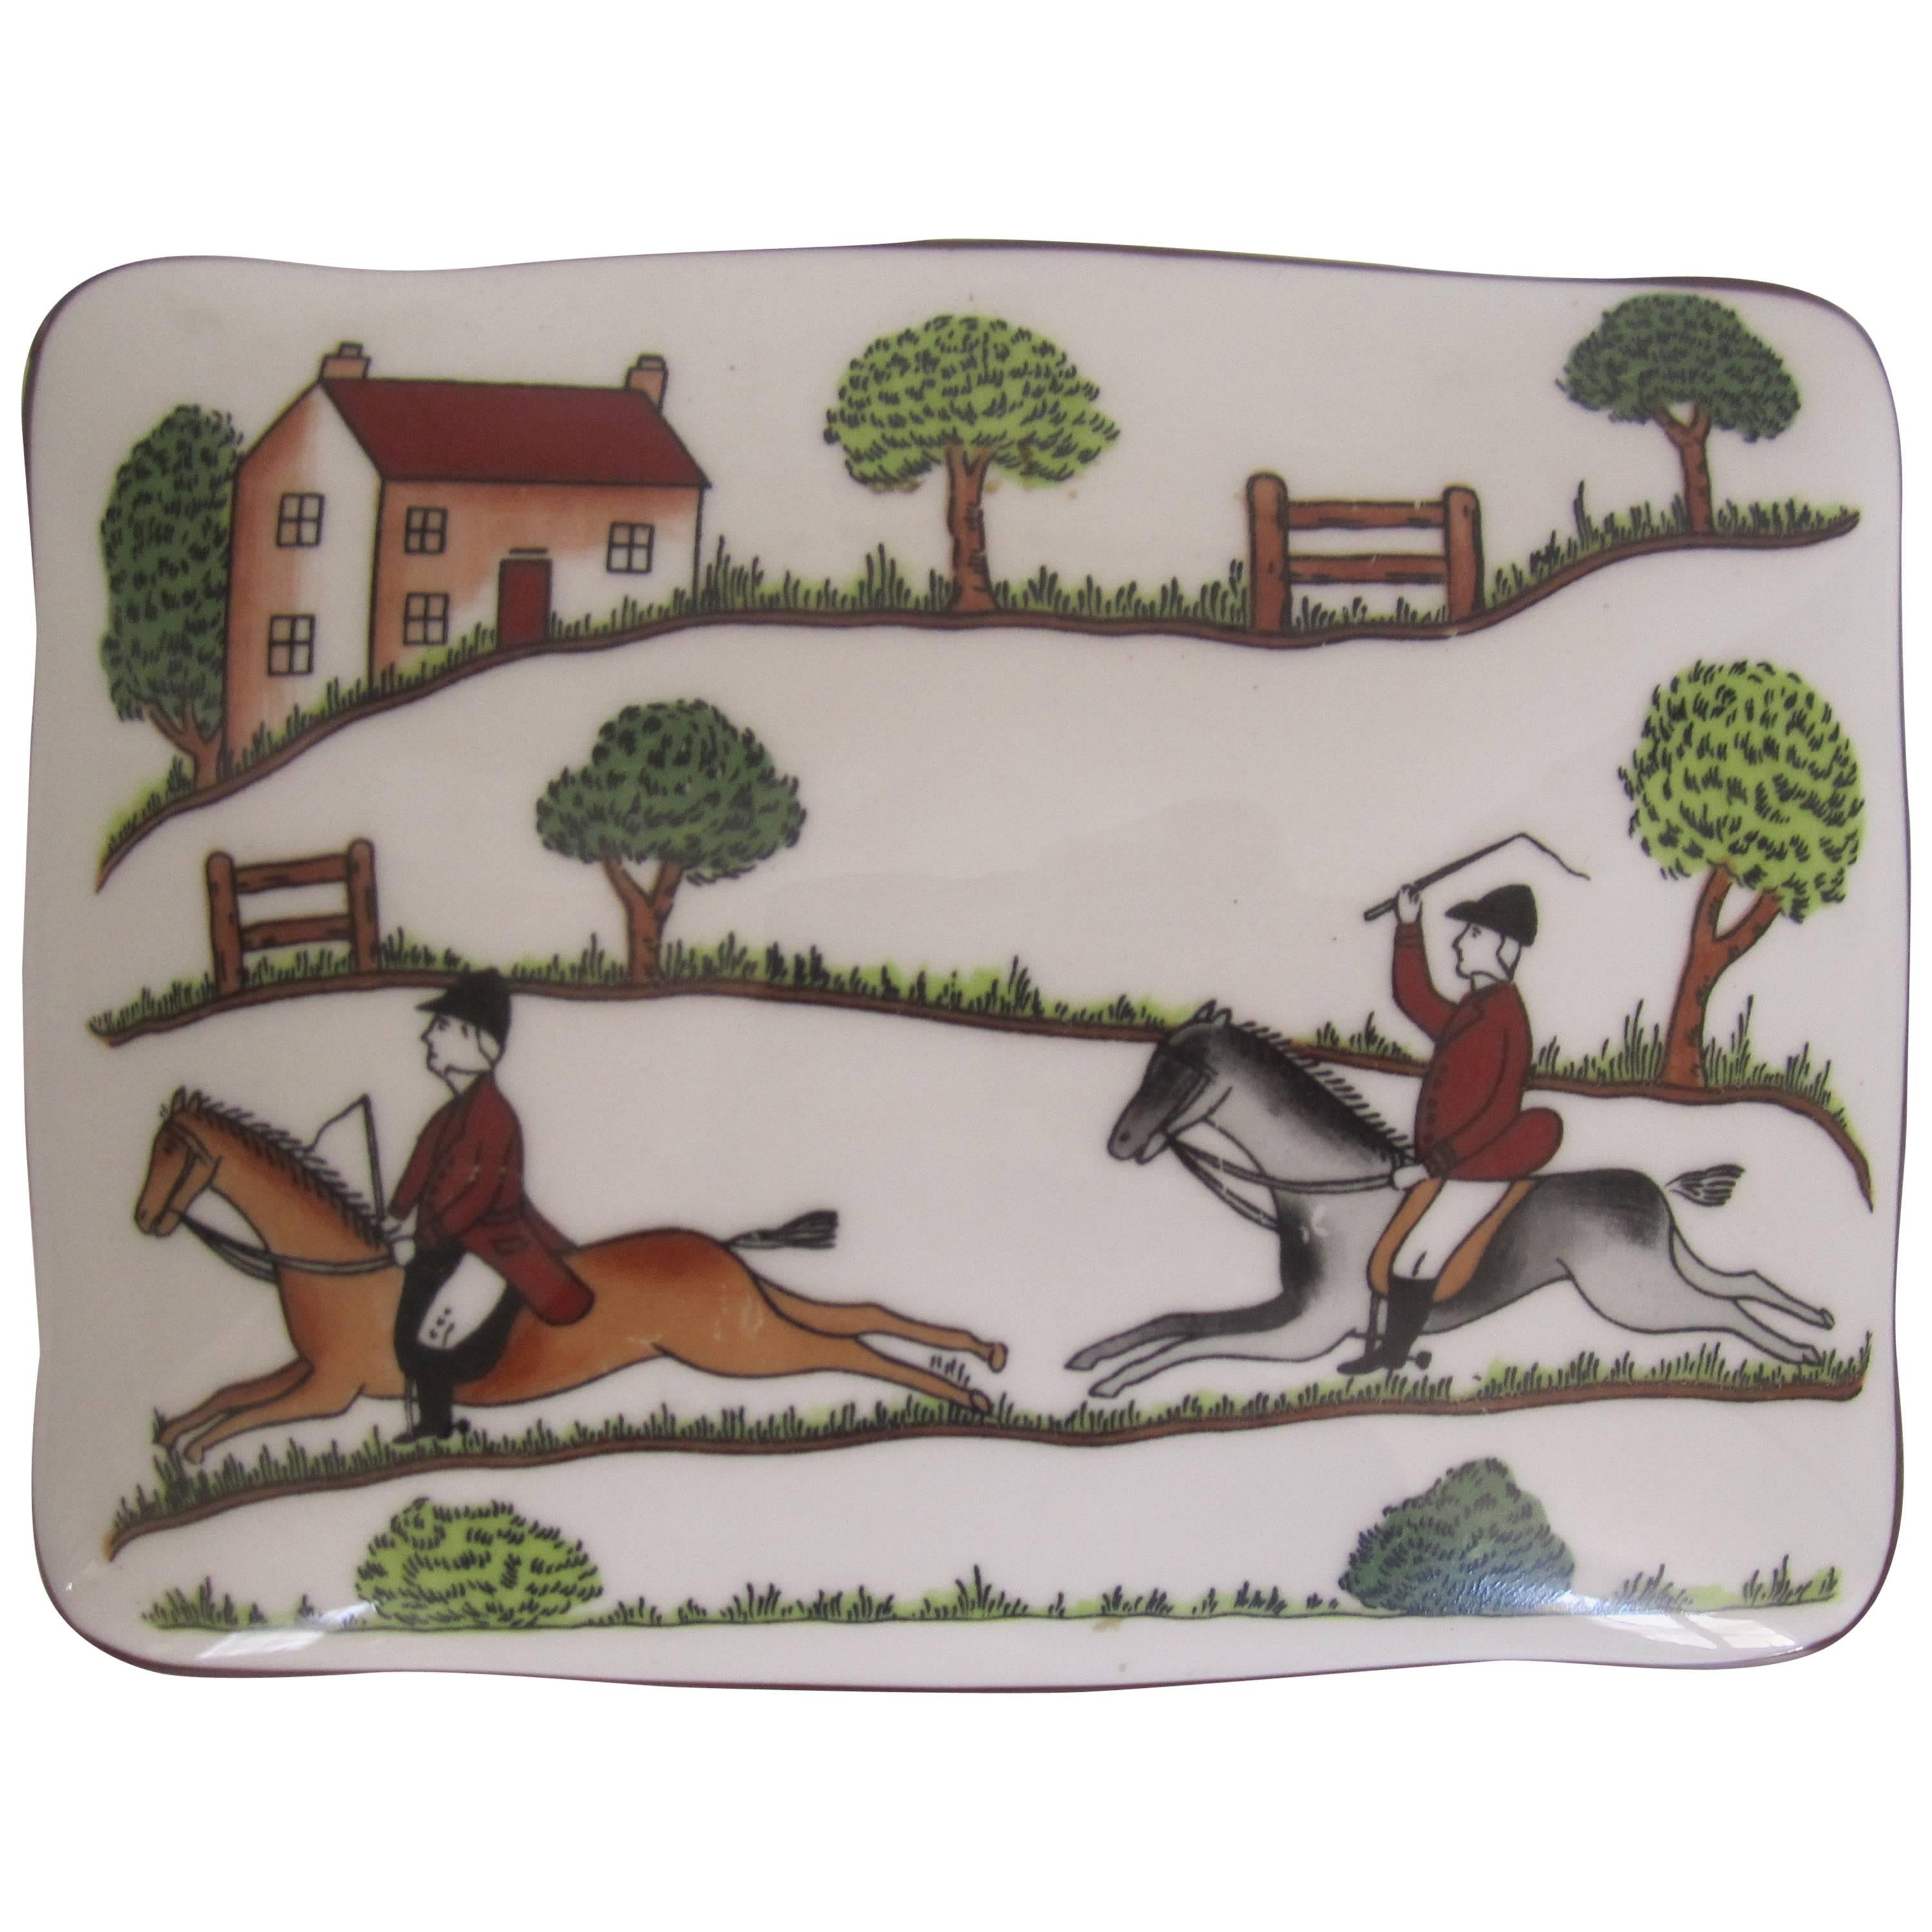 Equestrian Horse Hunting Scene Box in the Style of Hermès